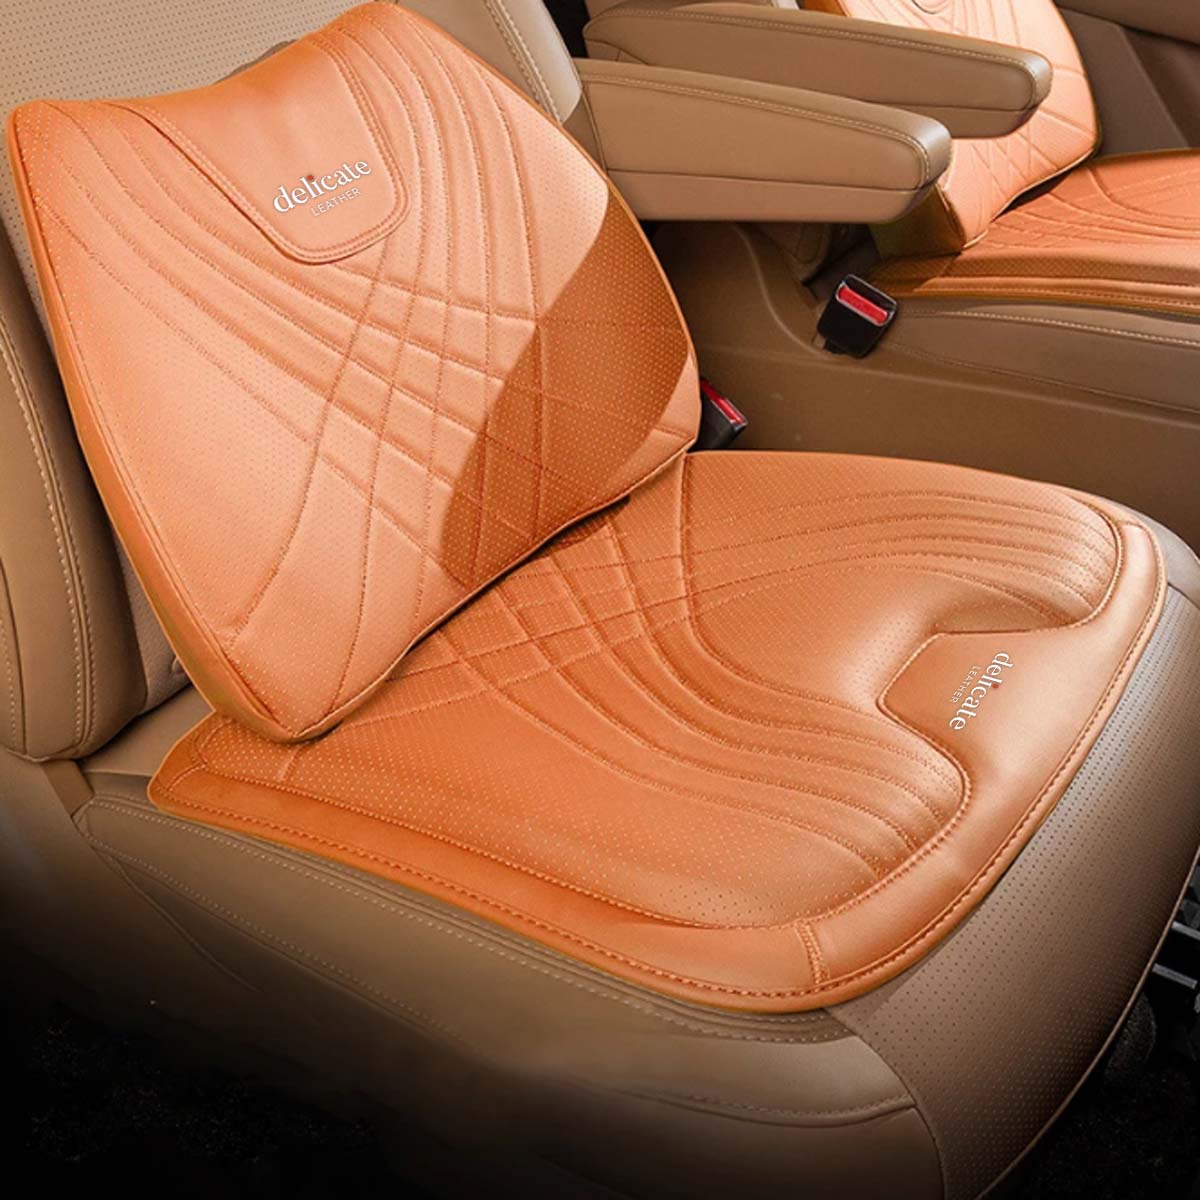 Nappa Leather Car Headrest Neck Pillow: Soft Seat Lumbar Support Waist Pillow for Enhanced Comfort - Delicate Leather